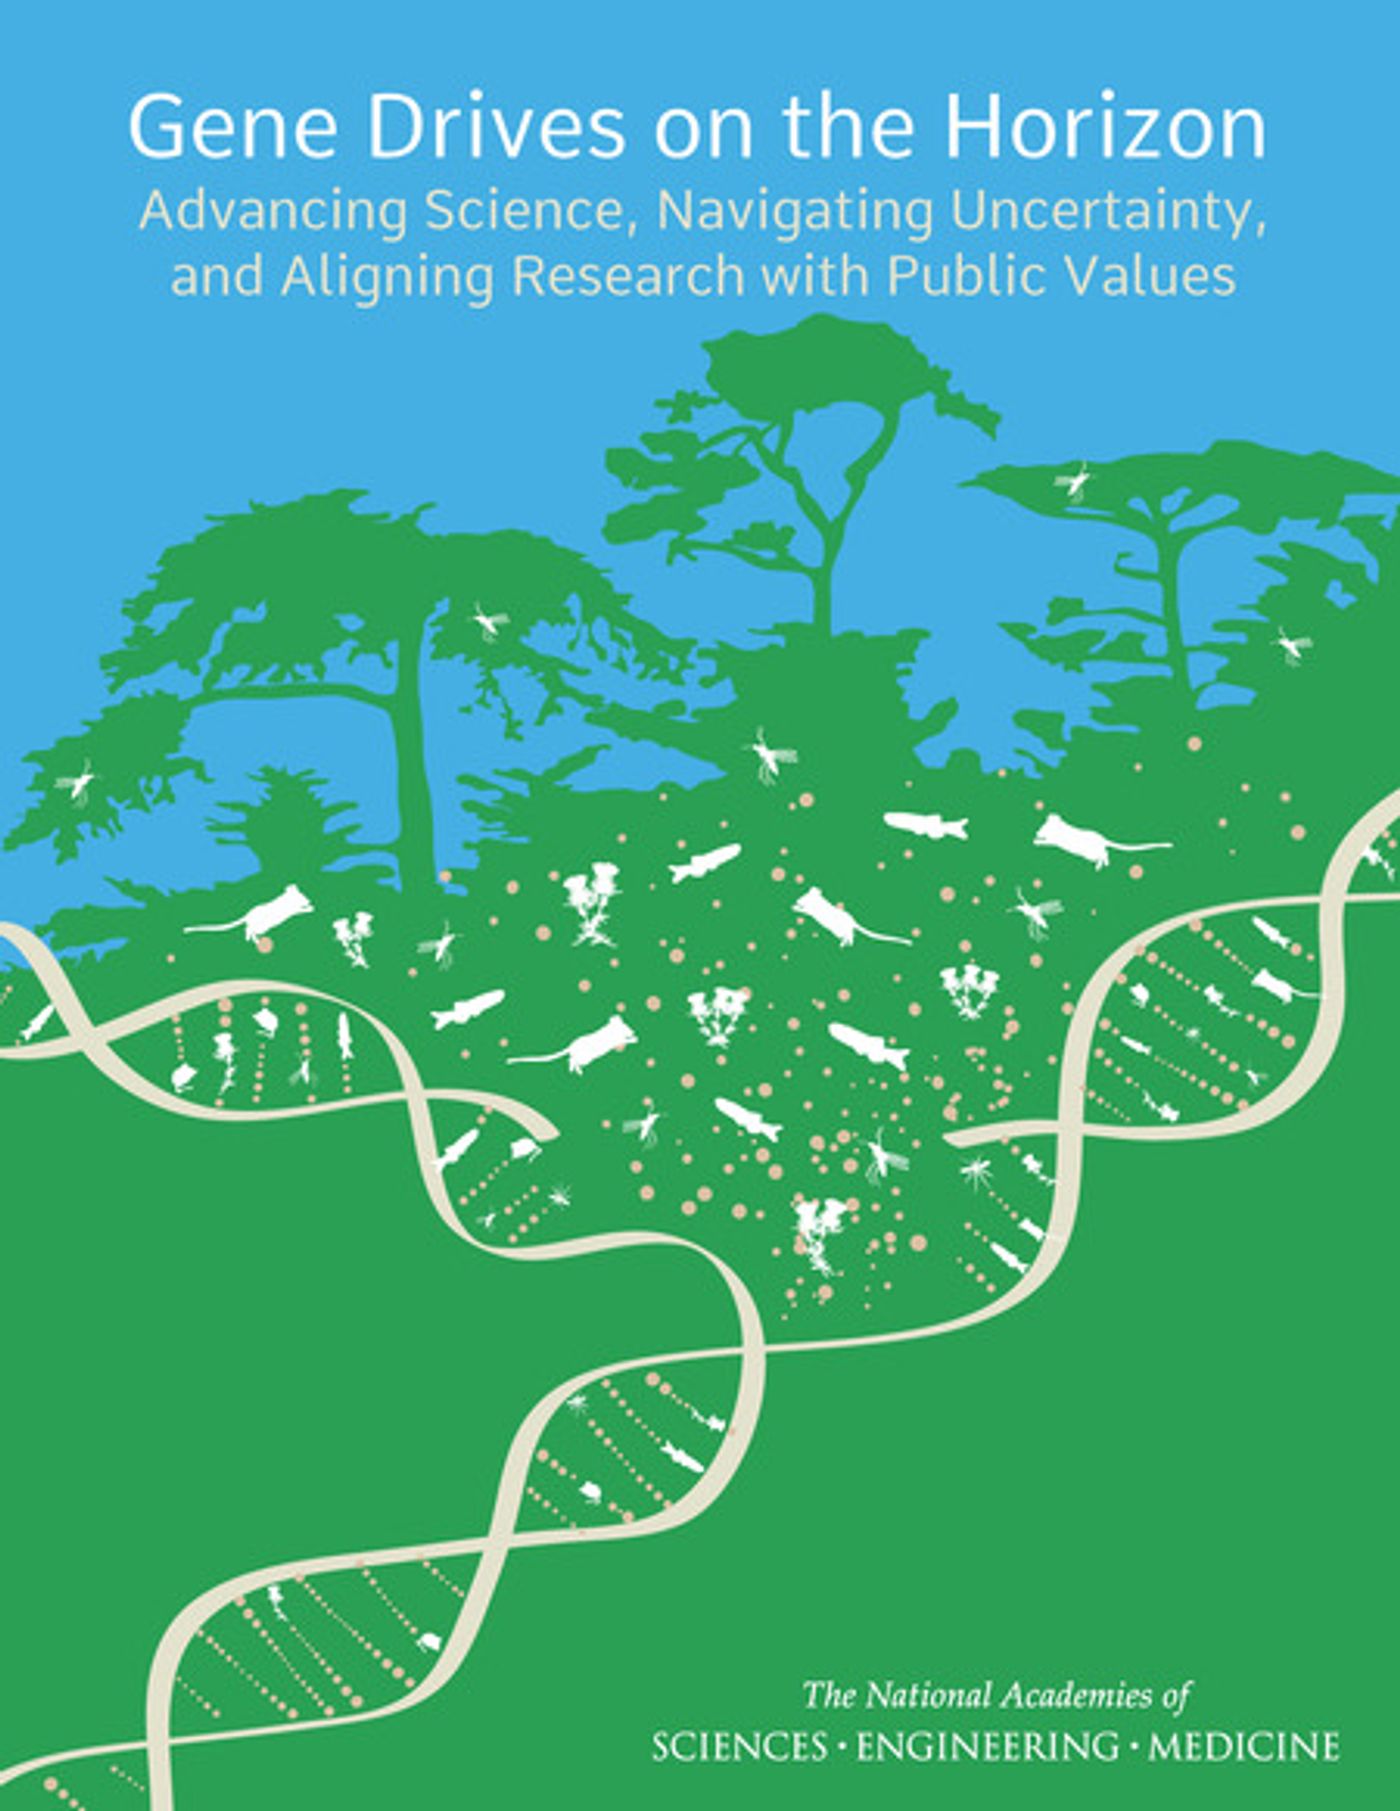 The National Academy of Sciences Report